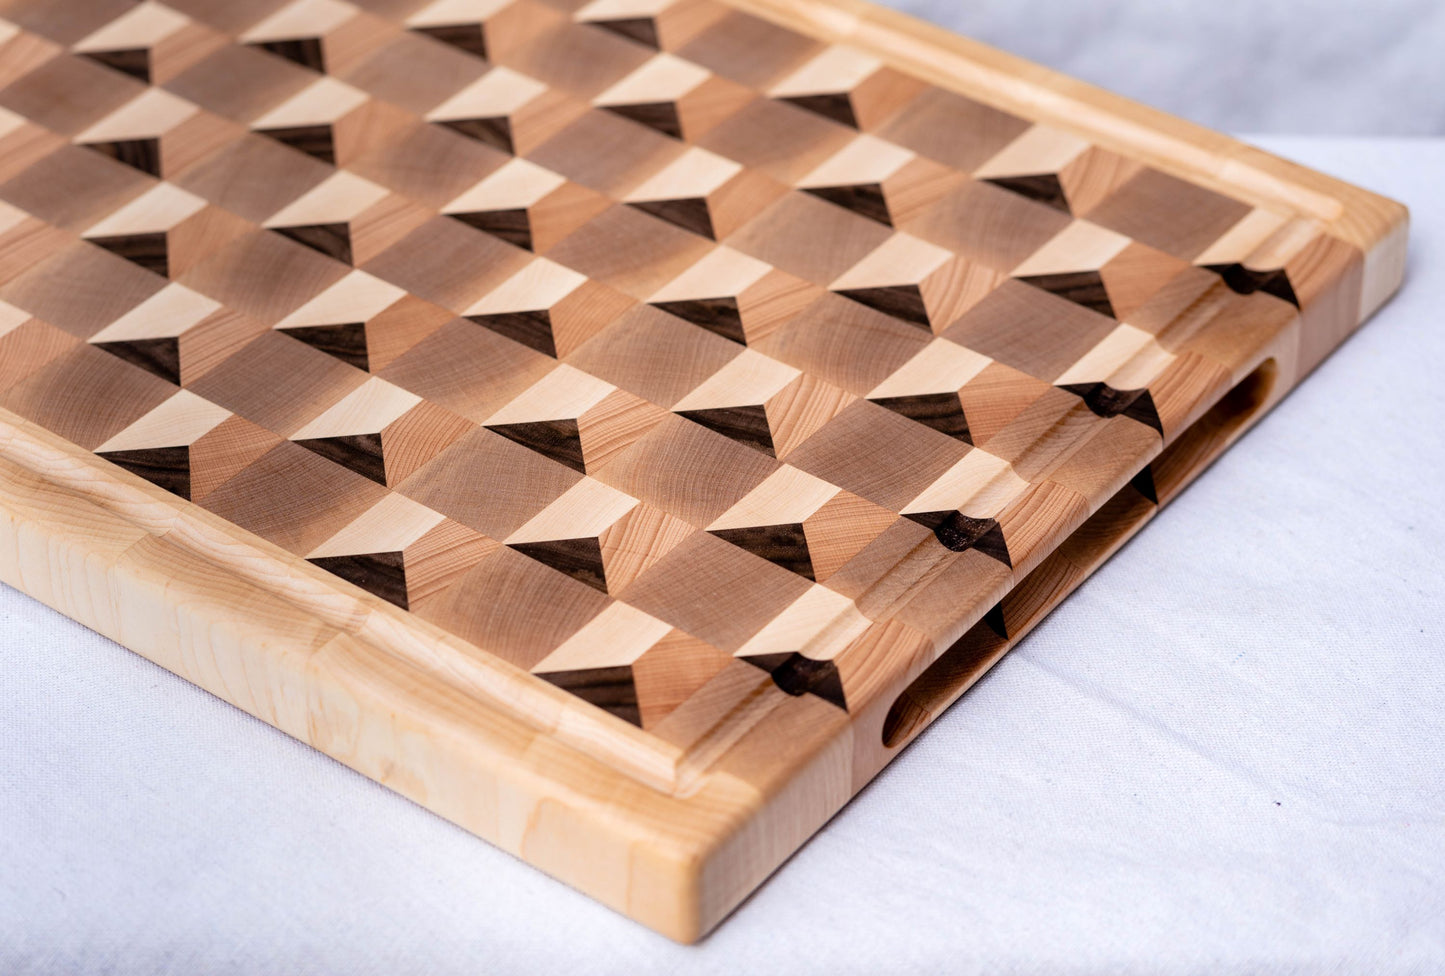 3D Design Cutting Board with Maple Wood Frame